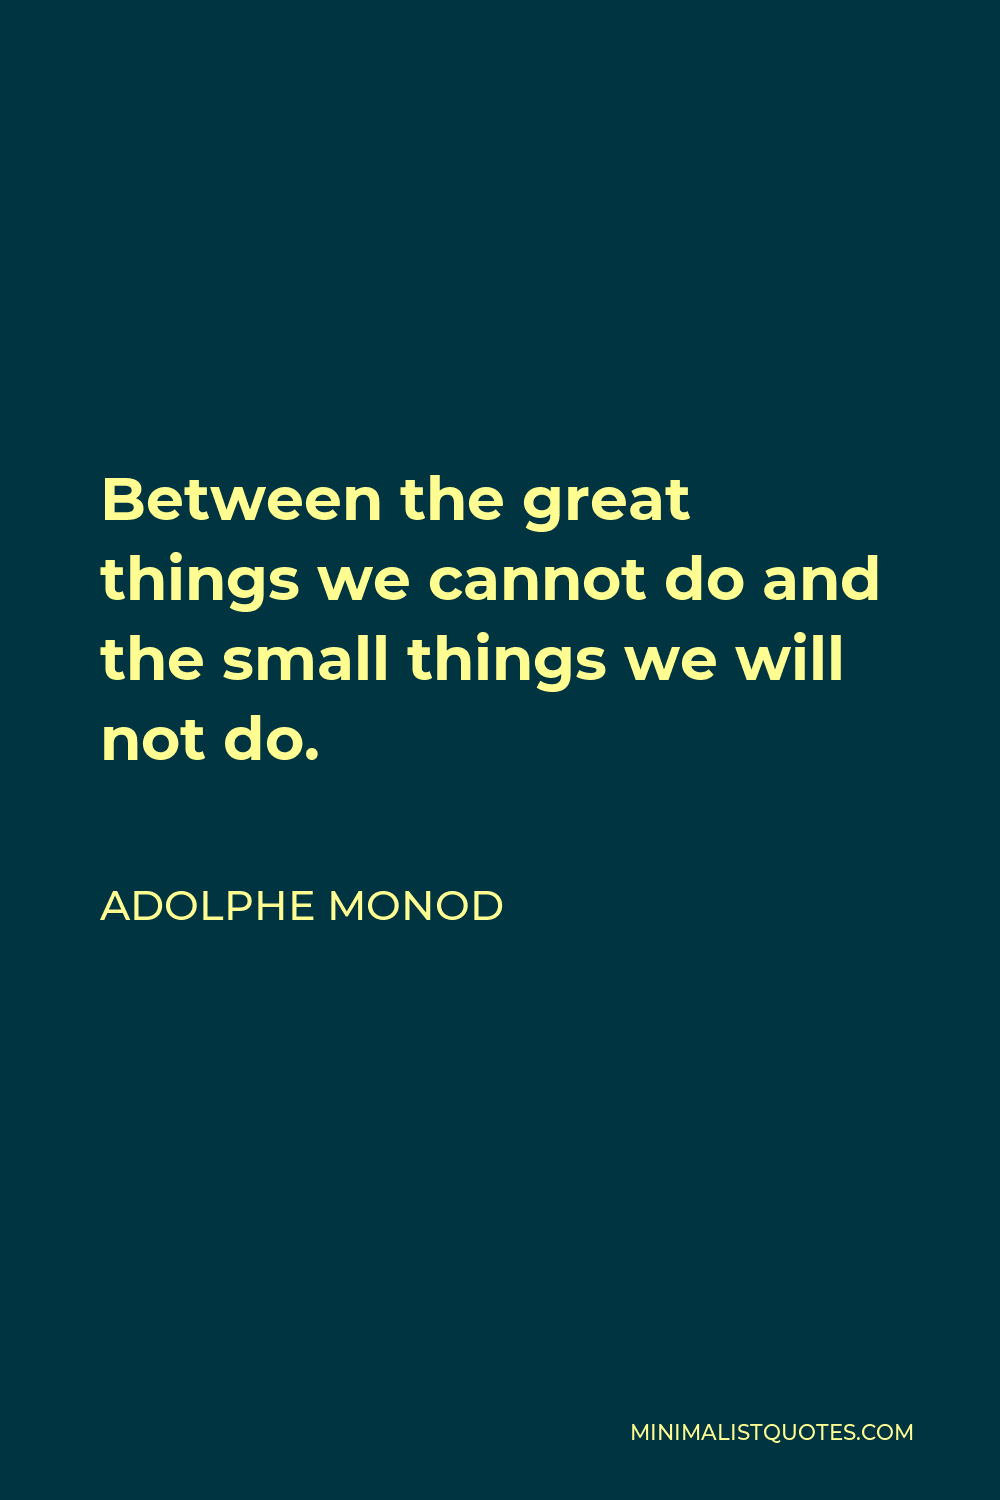 Adolphe Monod Quote - Between the great things we cannot do and the small things we will not do.